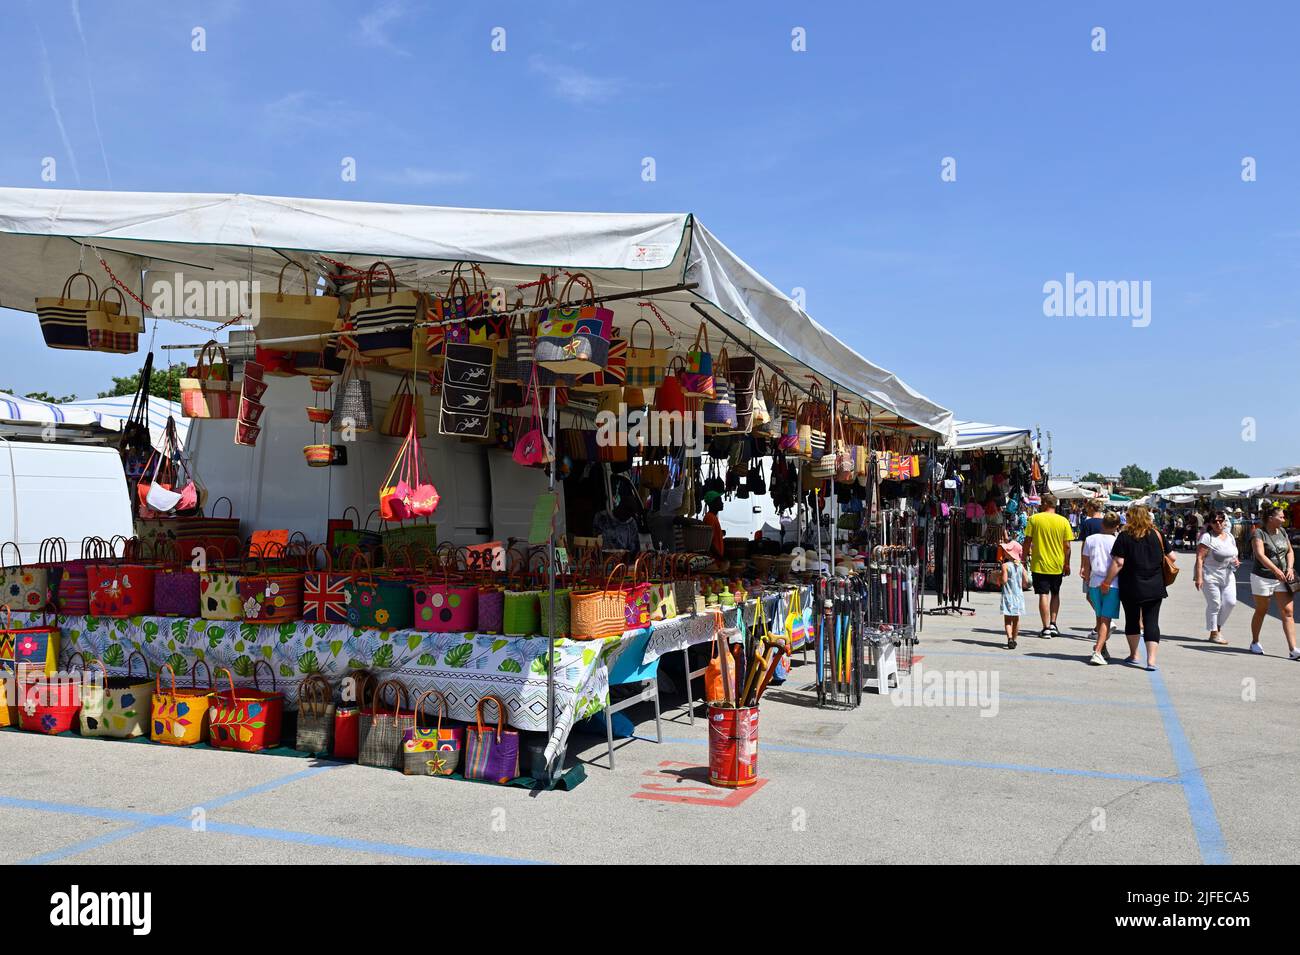 Caorle, Italy. June 18, 2022. Weekly market in Caorle Stock Photo